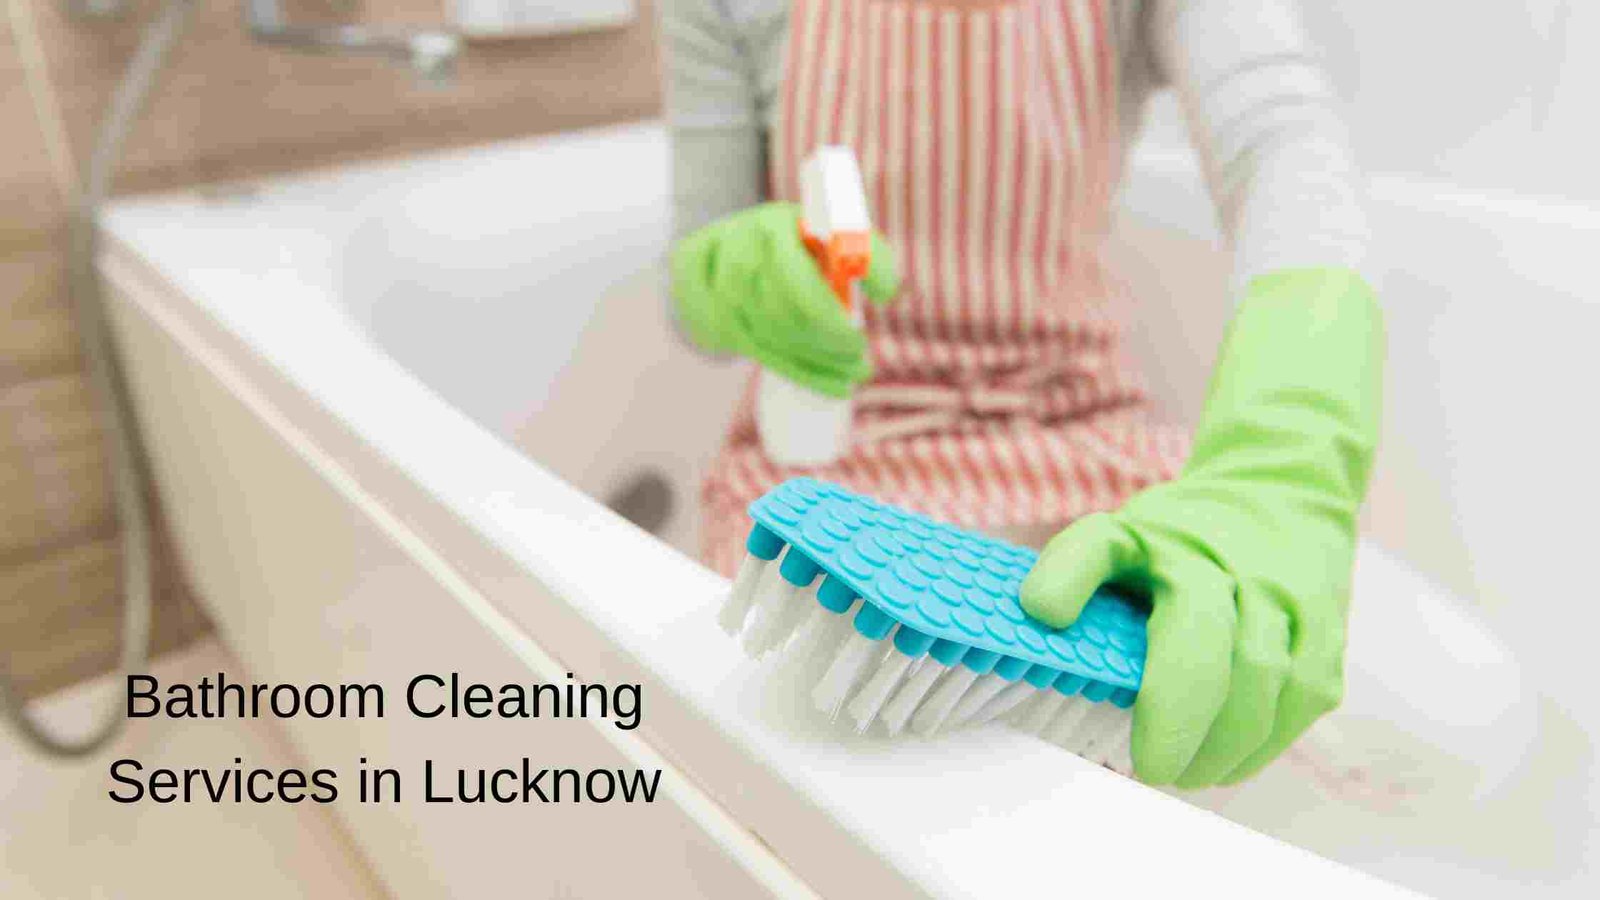 Bathroom Cleaning Services in Lucknow